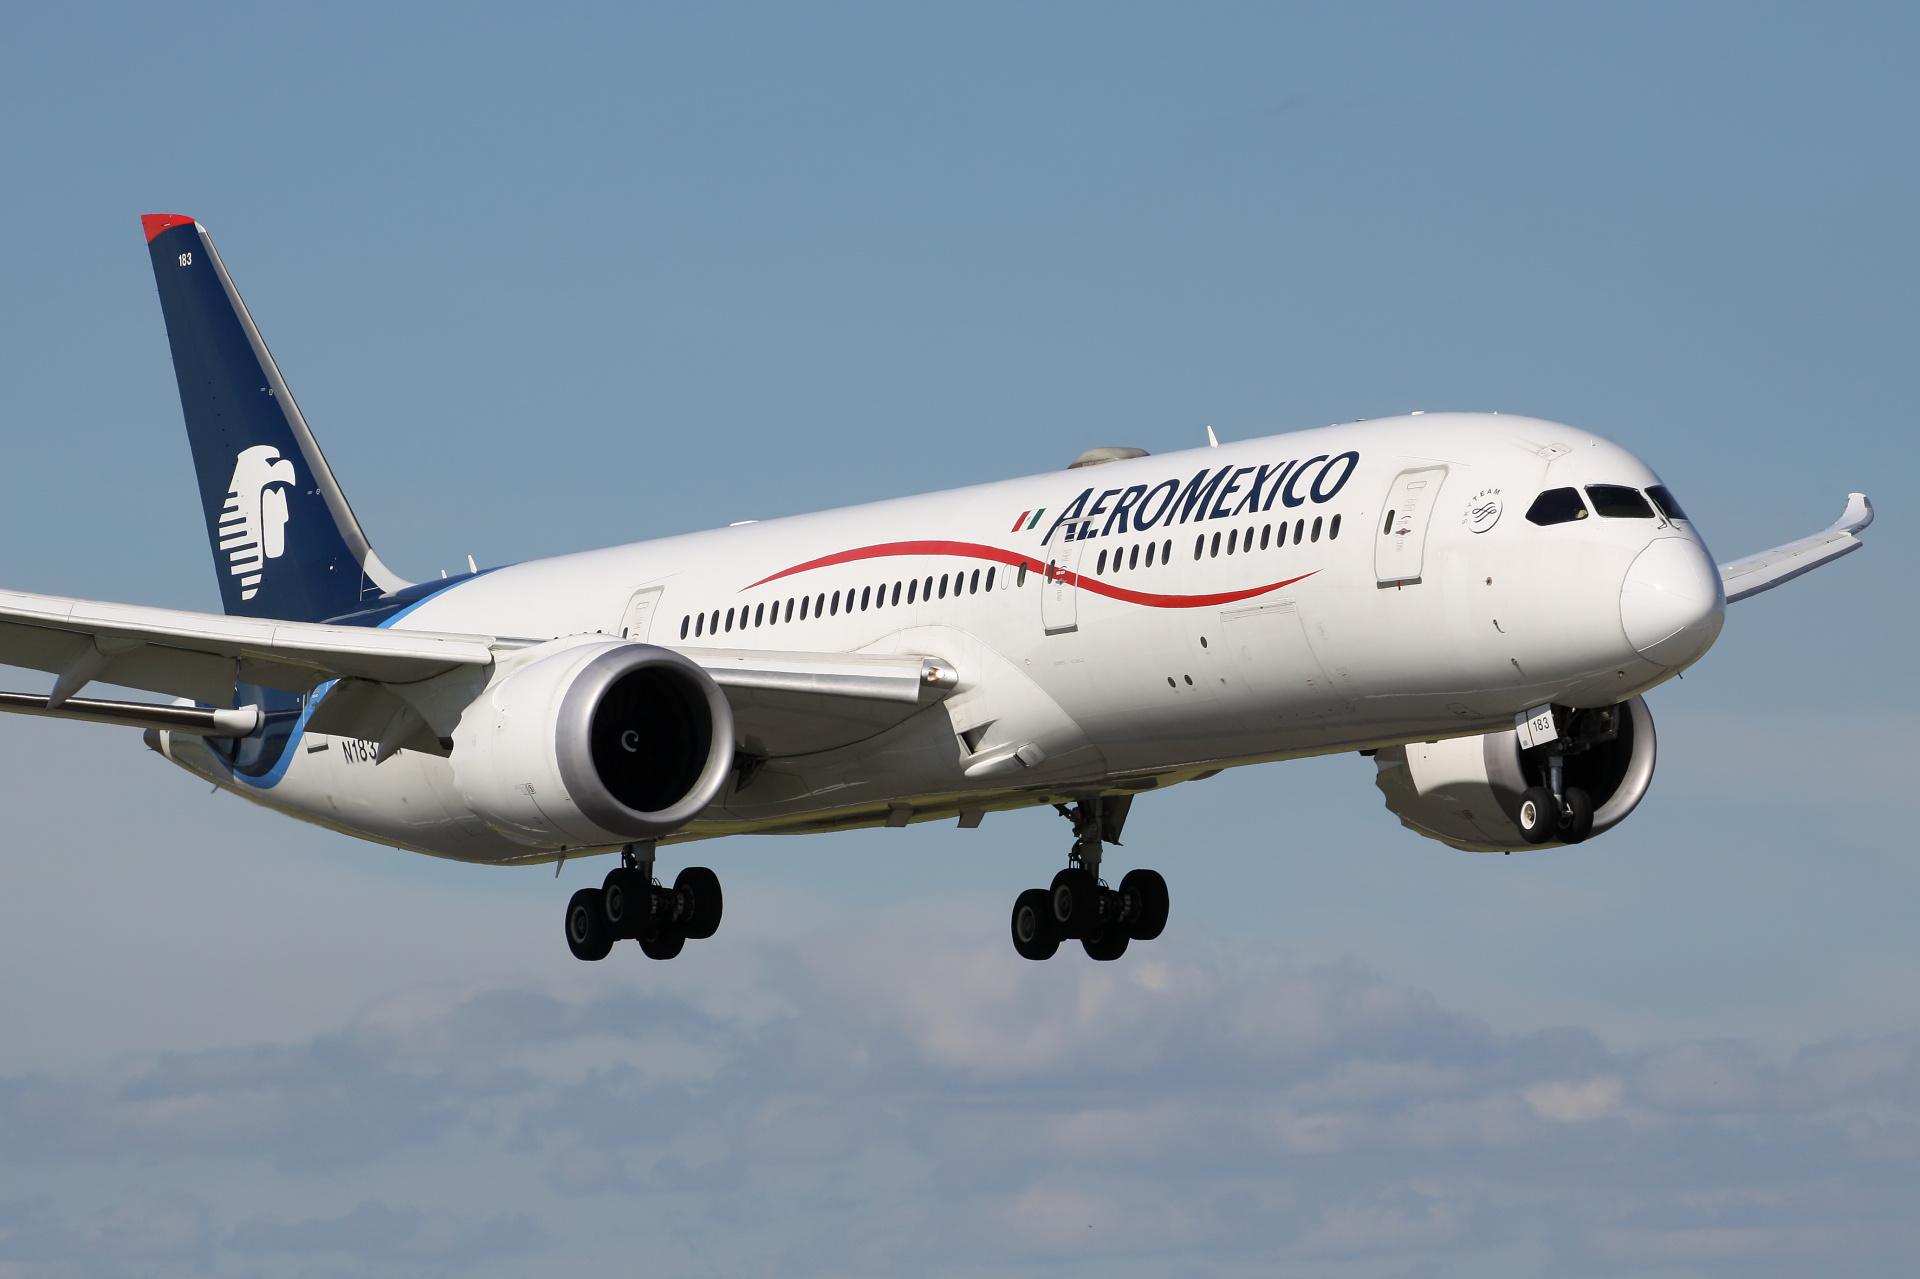 N183AM, AeroMexico (Aircraft » Schiphol Spotting » Boeing 787-9 Dreamliner)